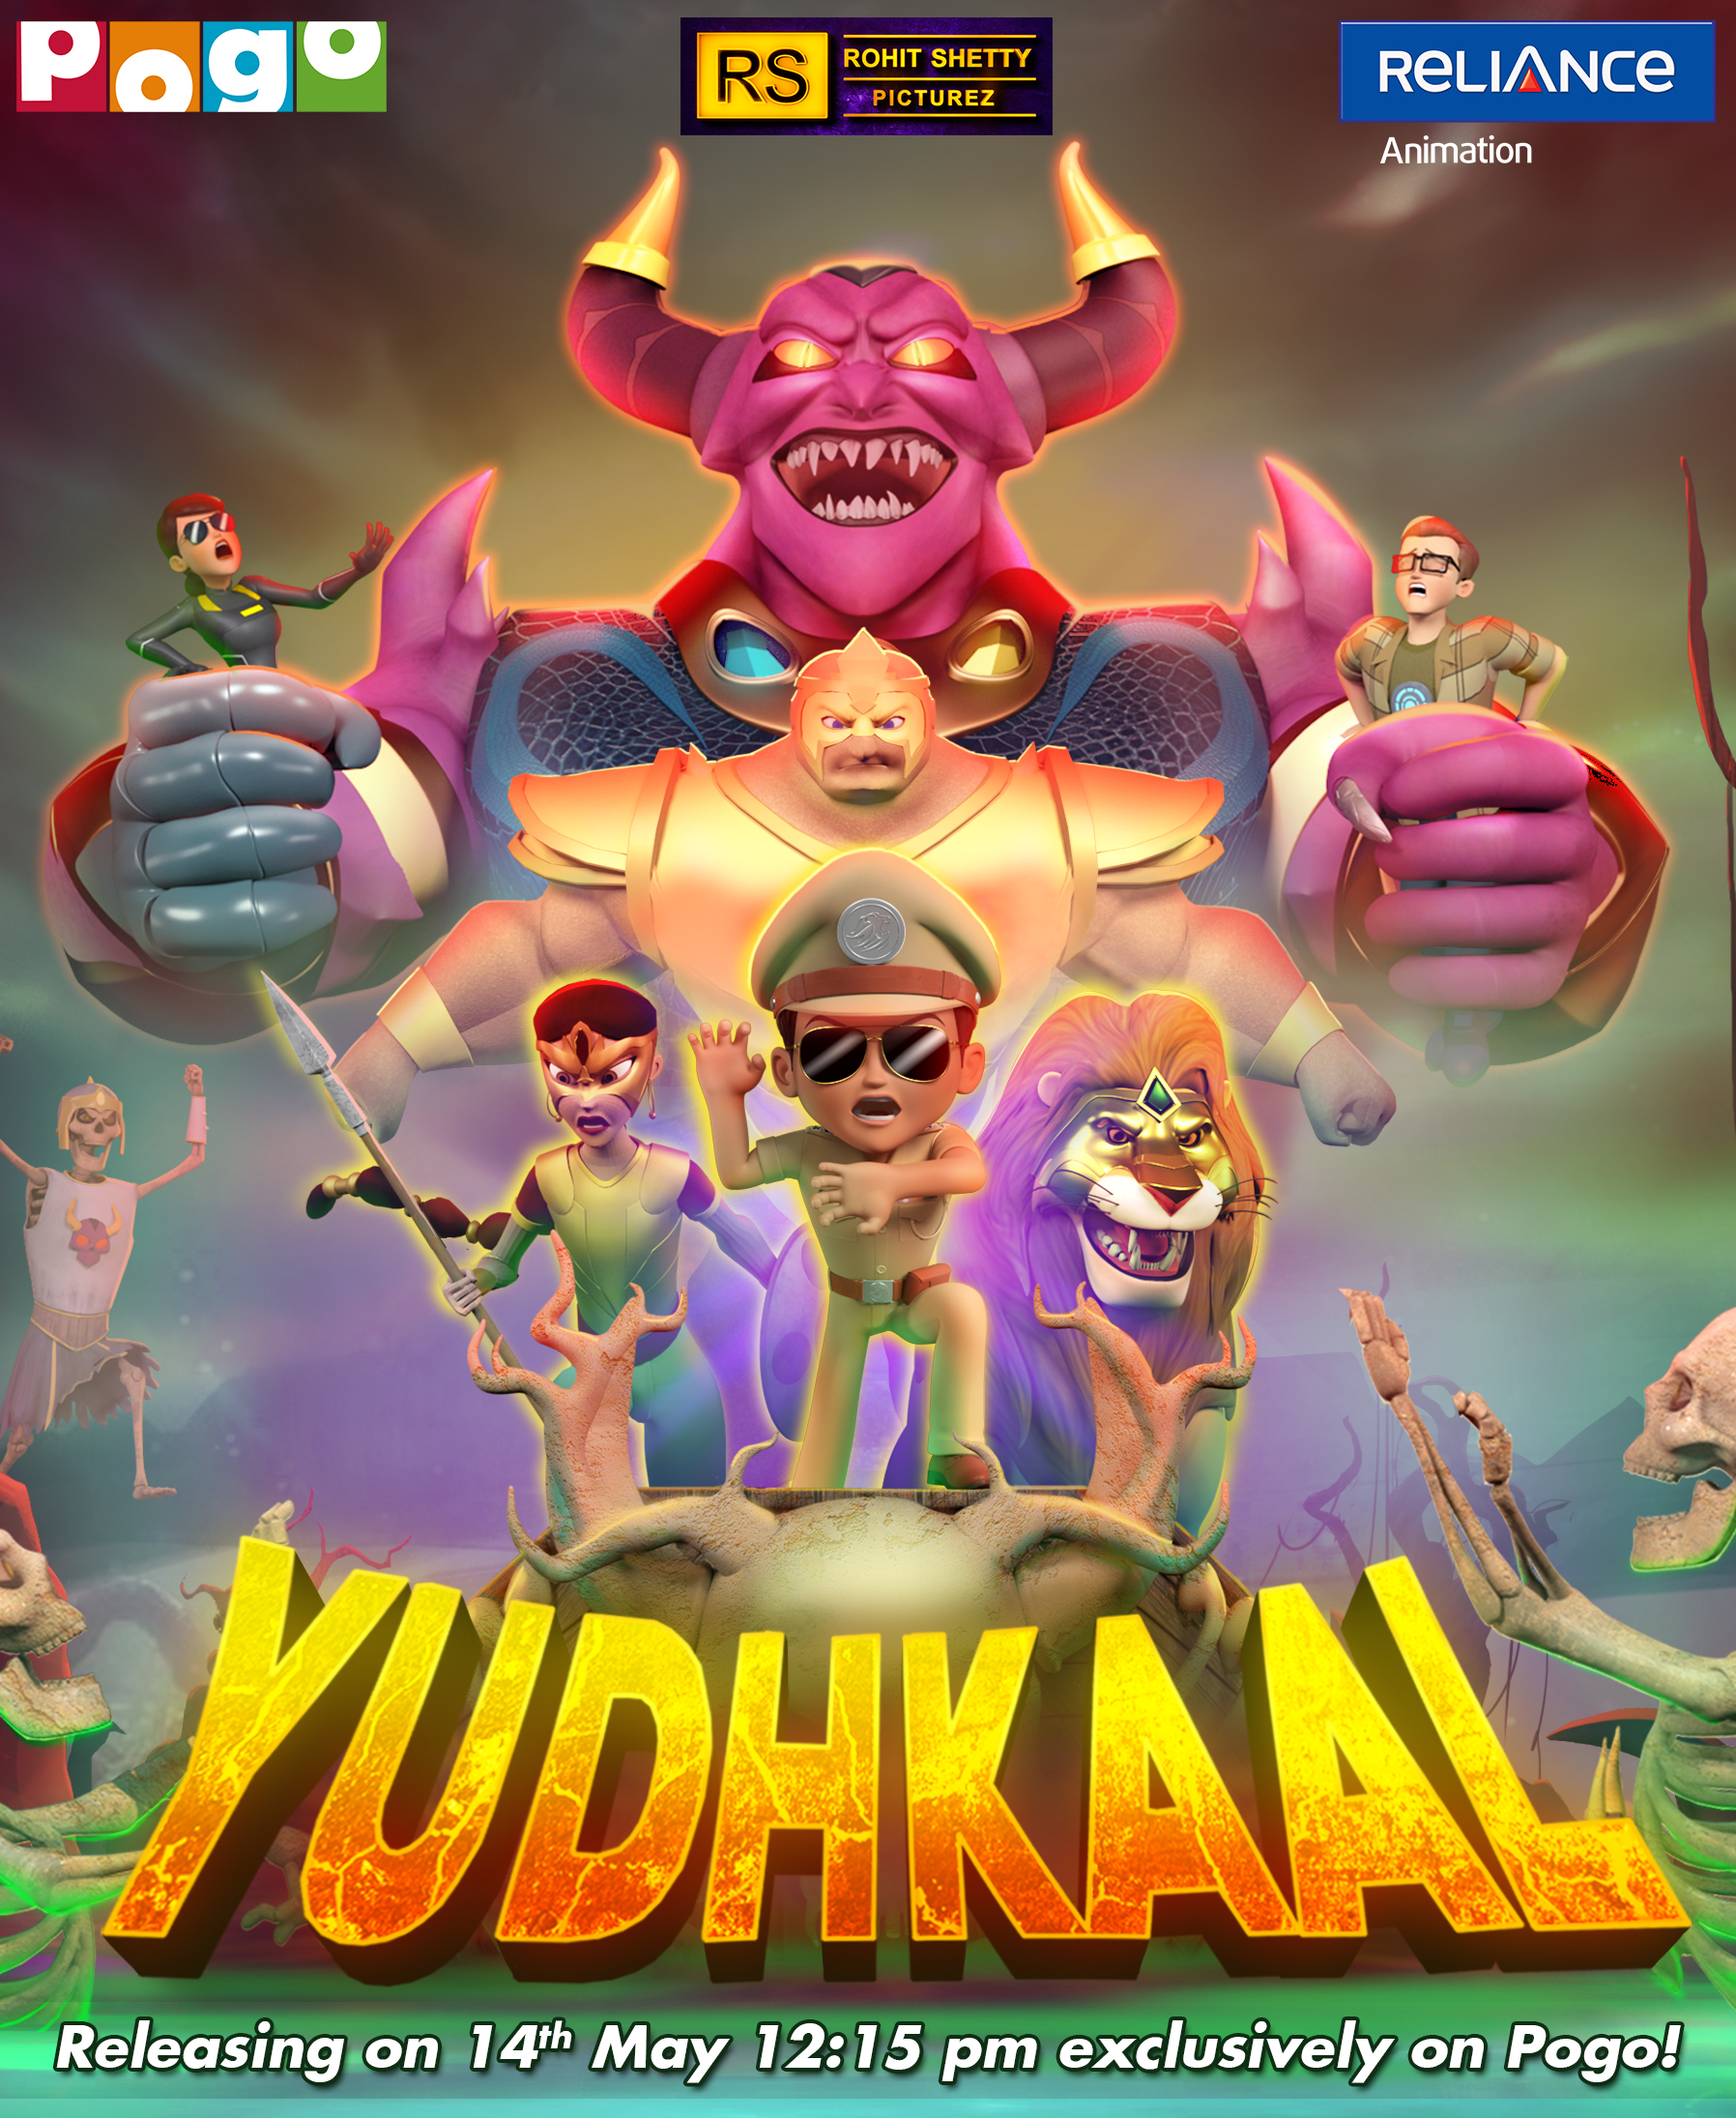 Little Singham Animated Official Release Poster